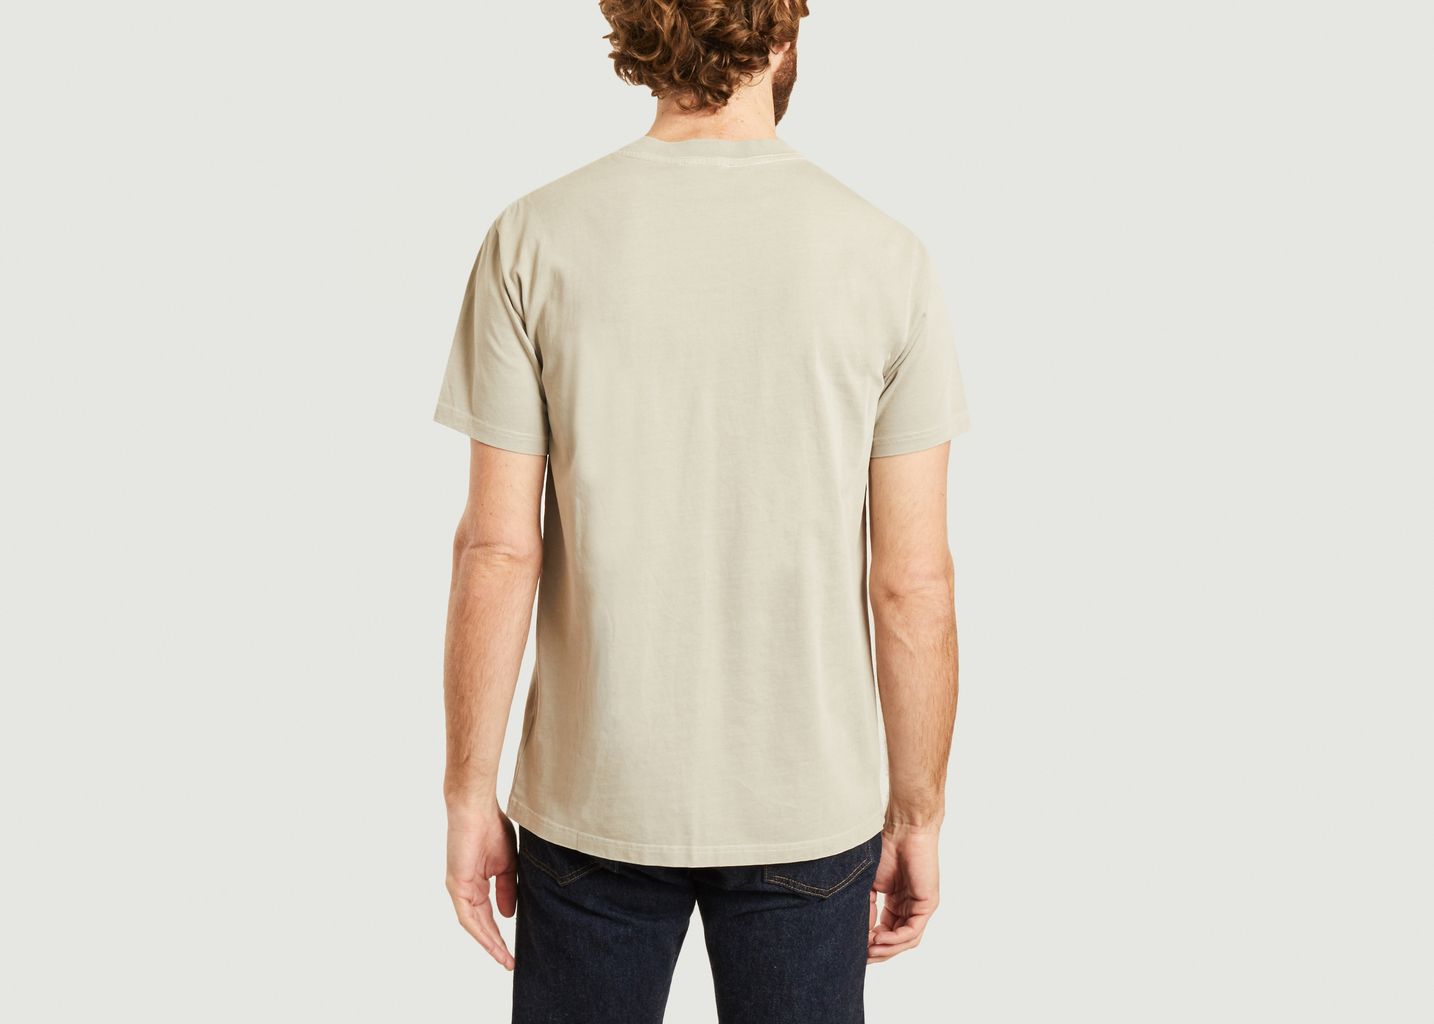 Fizalley T-shirt - American Vintage